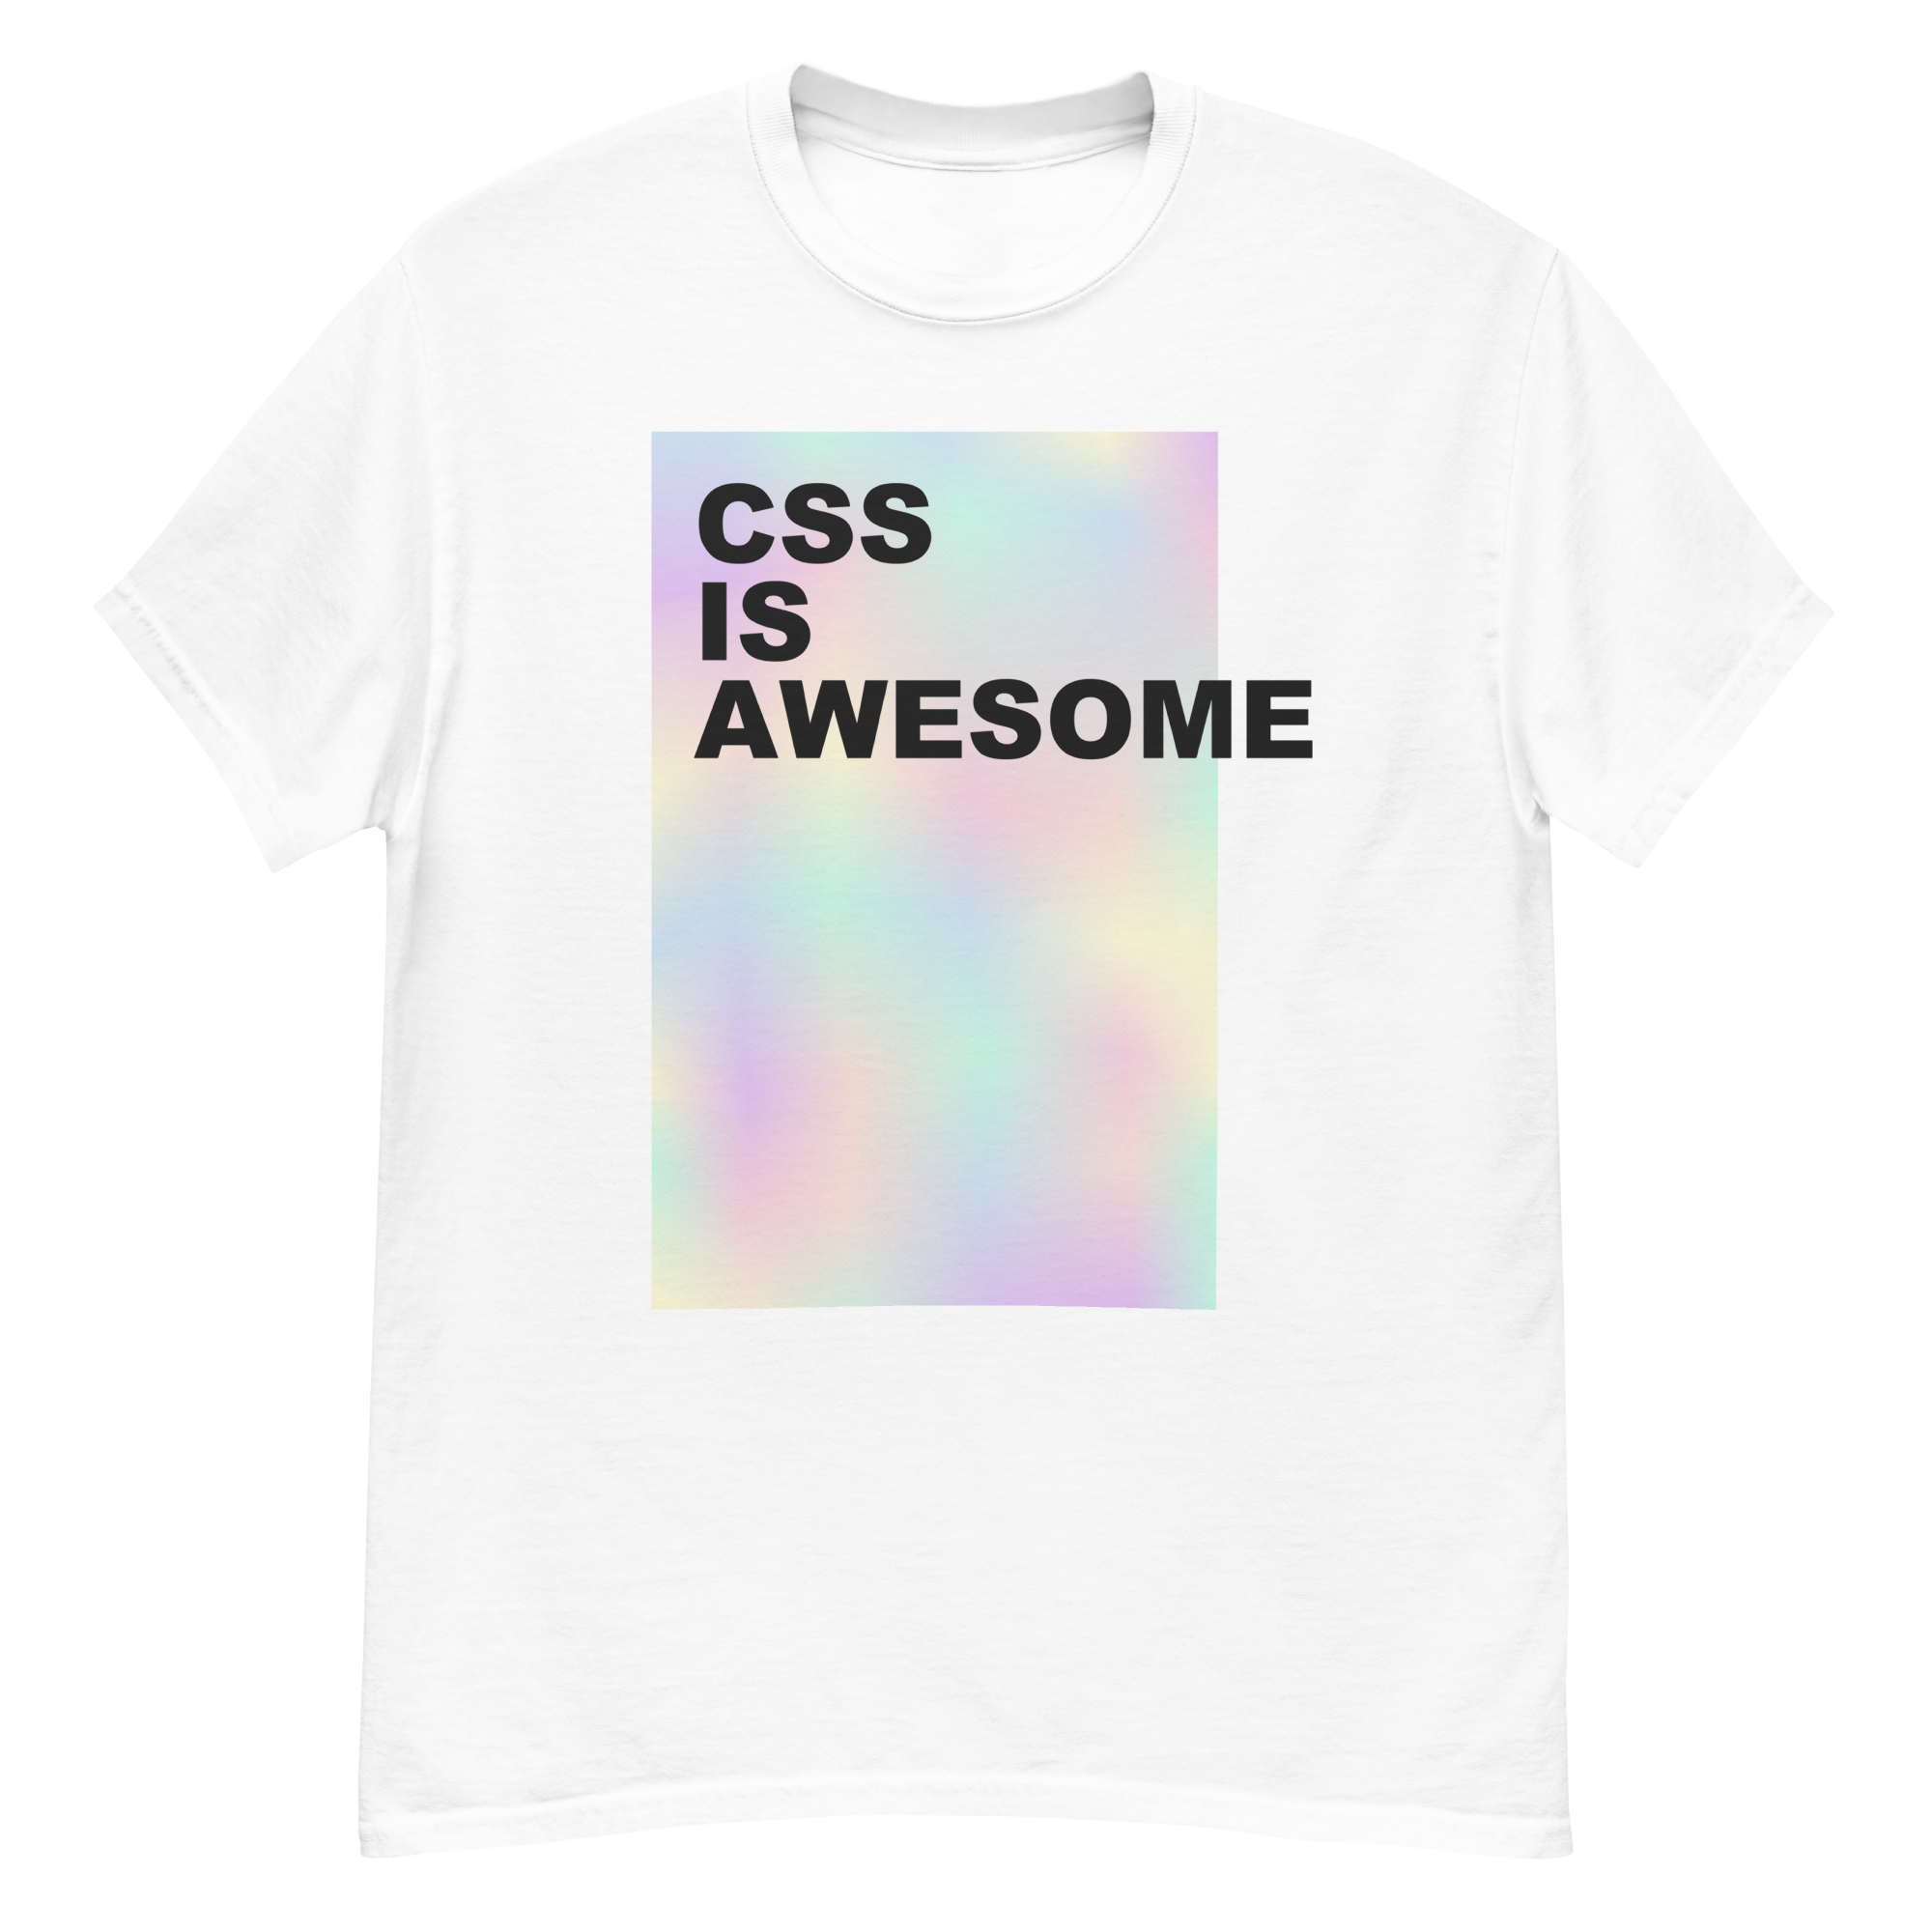 CSS is awesome t-shirt